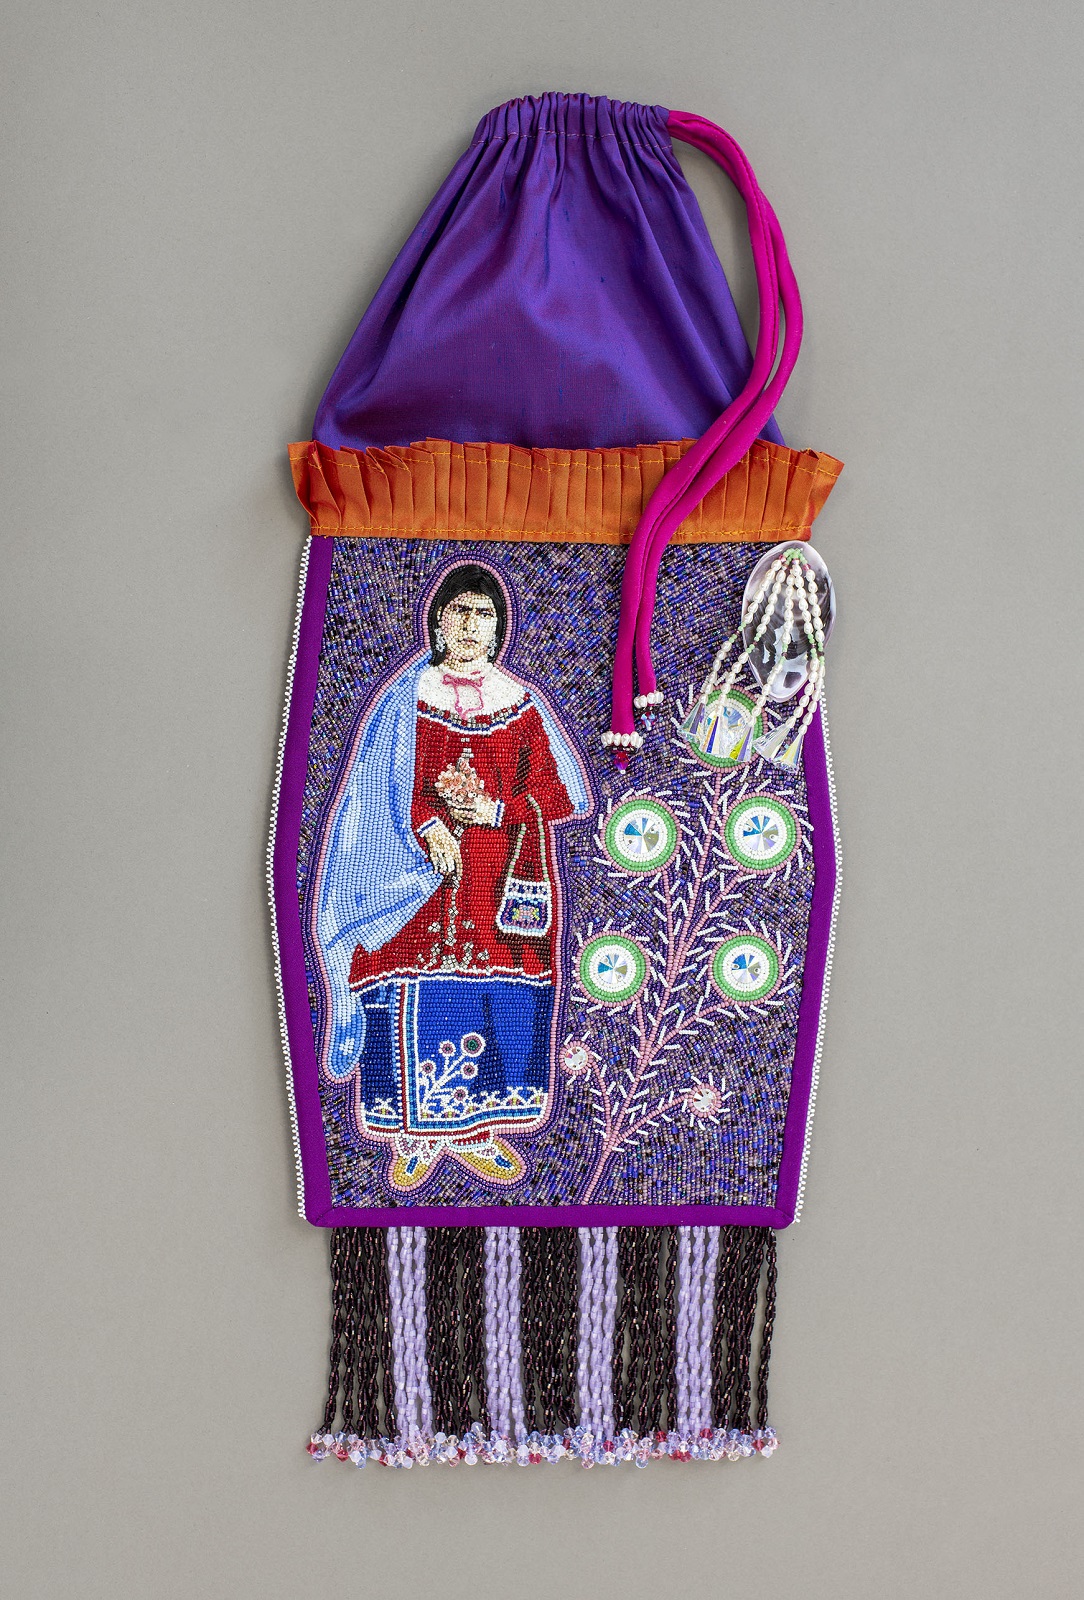 Purple drawstring pouch with tassels at bottom, fringe at the upper half, and beaded woman wiht a red shirt and blue skirt next to beaded floral